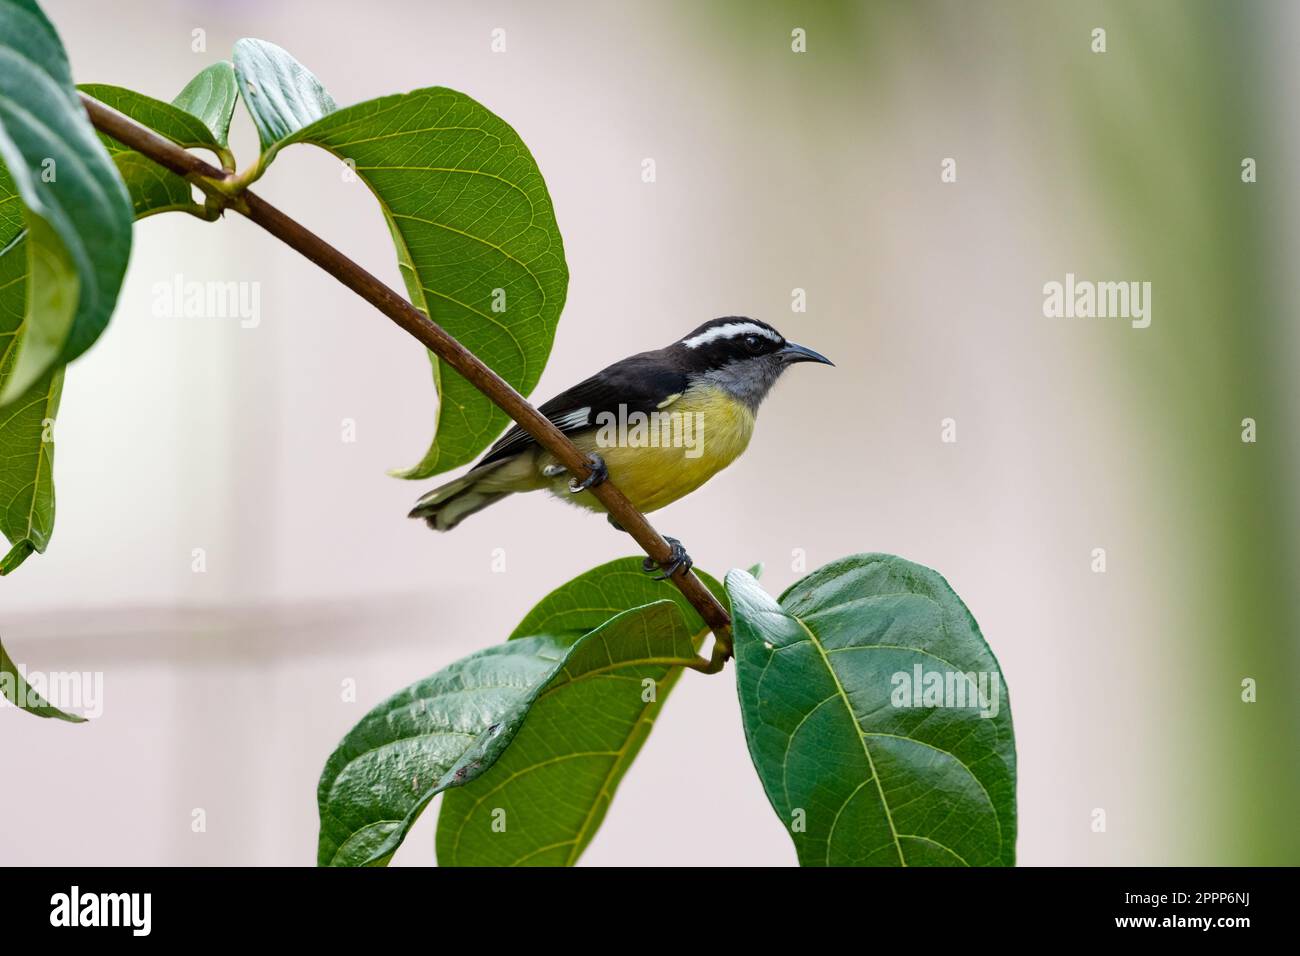 Bananquit bird perching on a branch with leaves with a light colored background Stock Photo